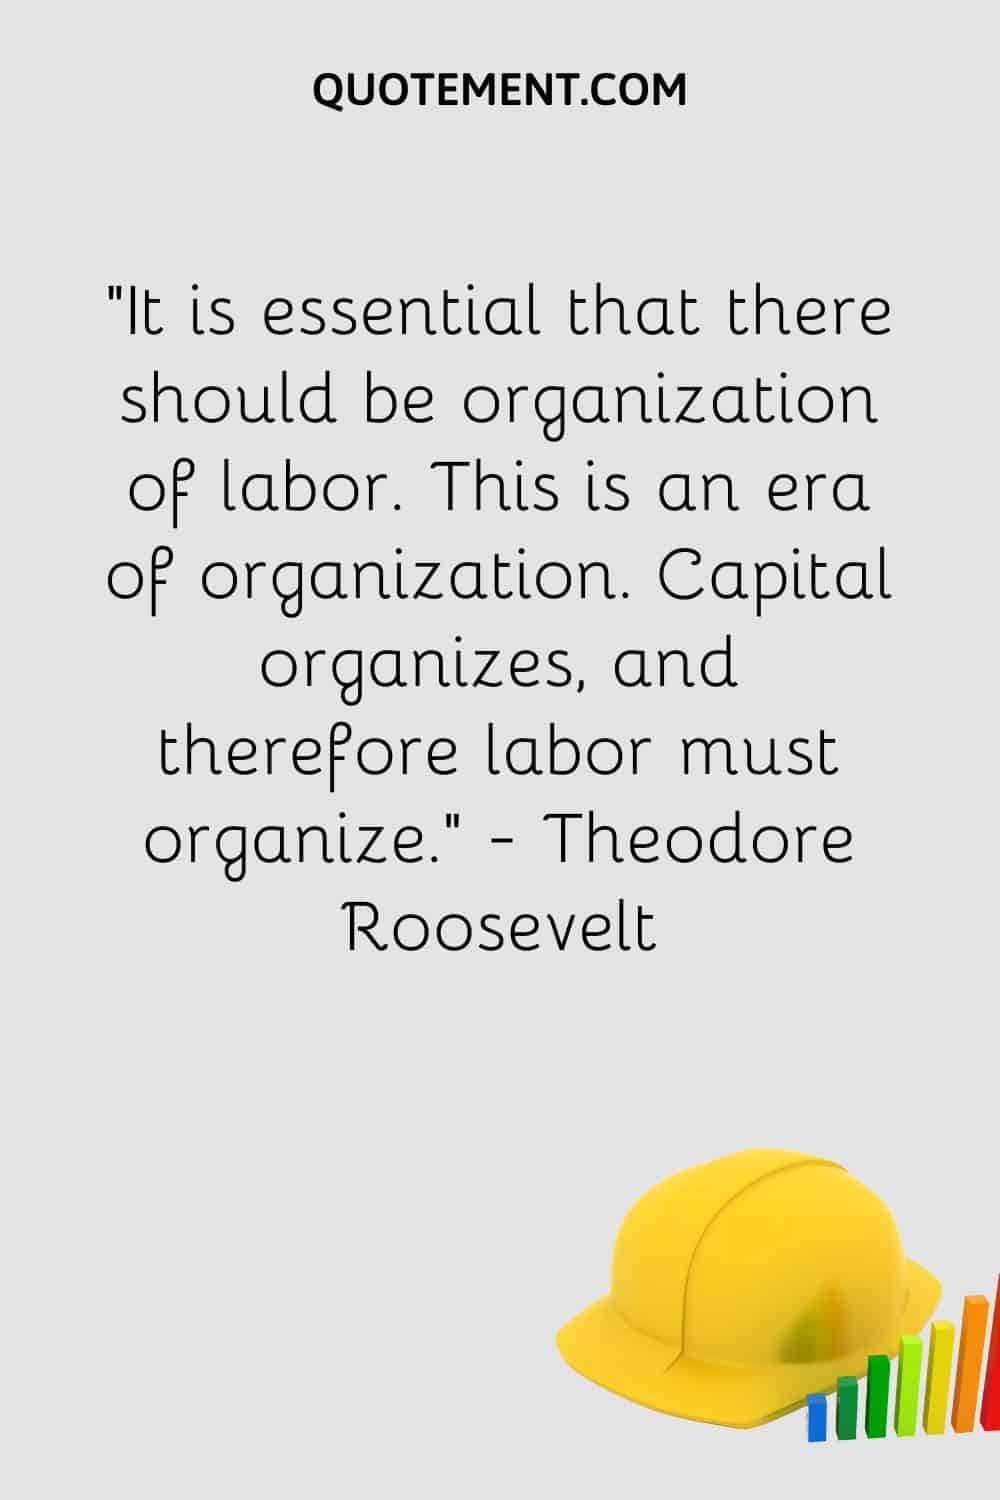 It is essential that there should be organization of labor.